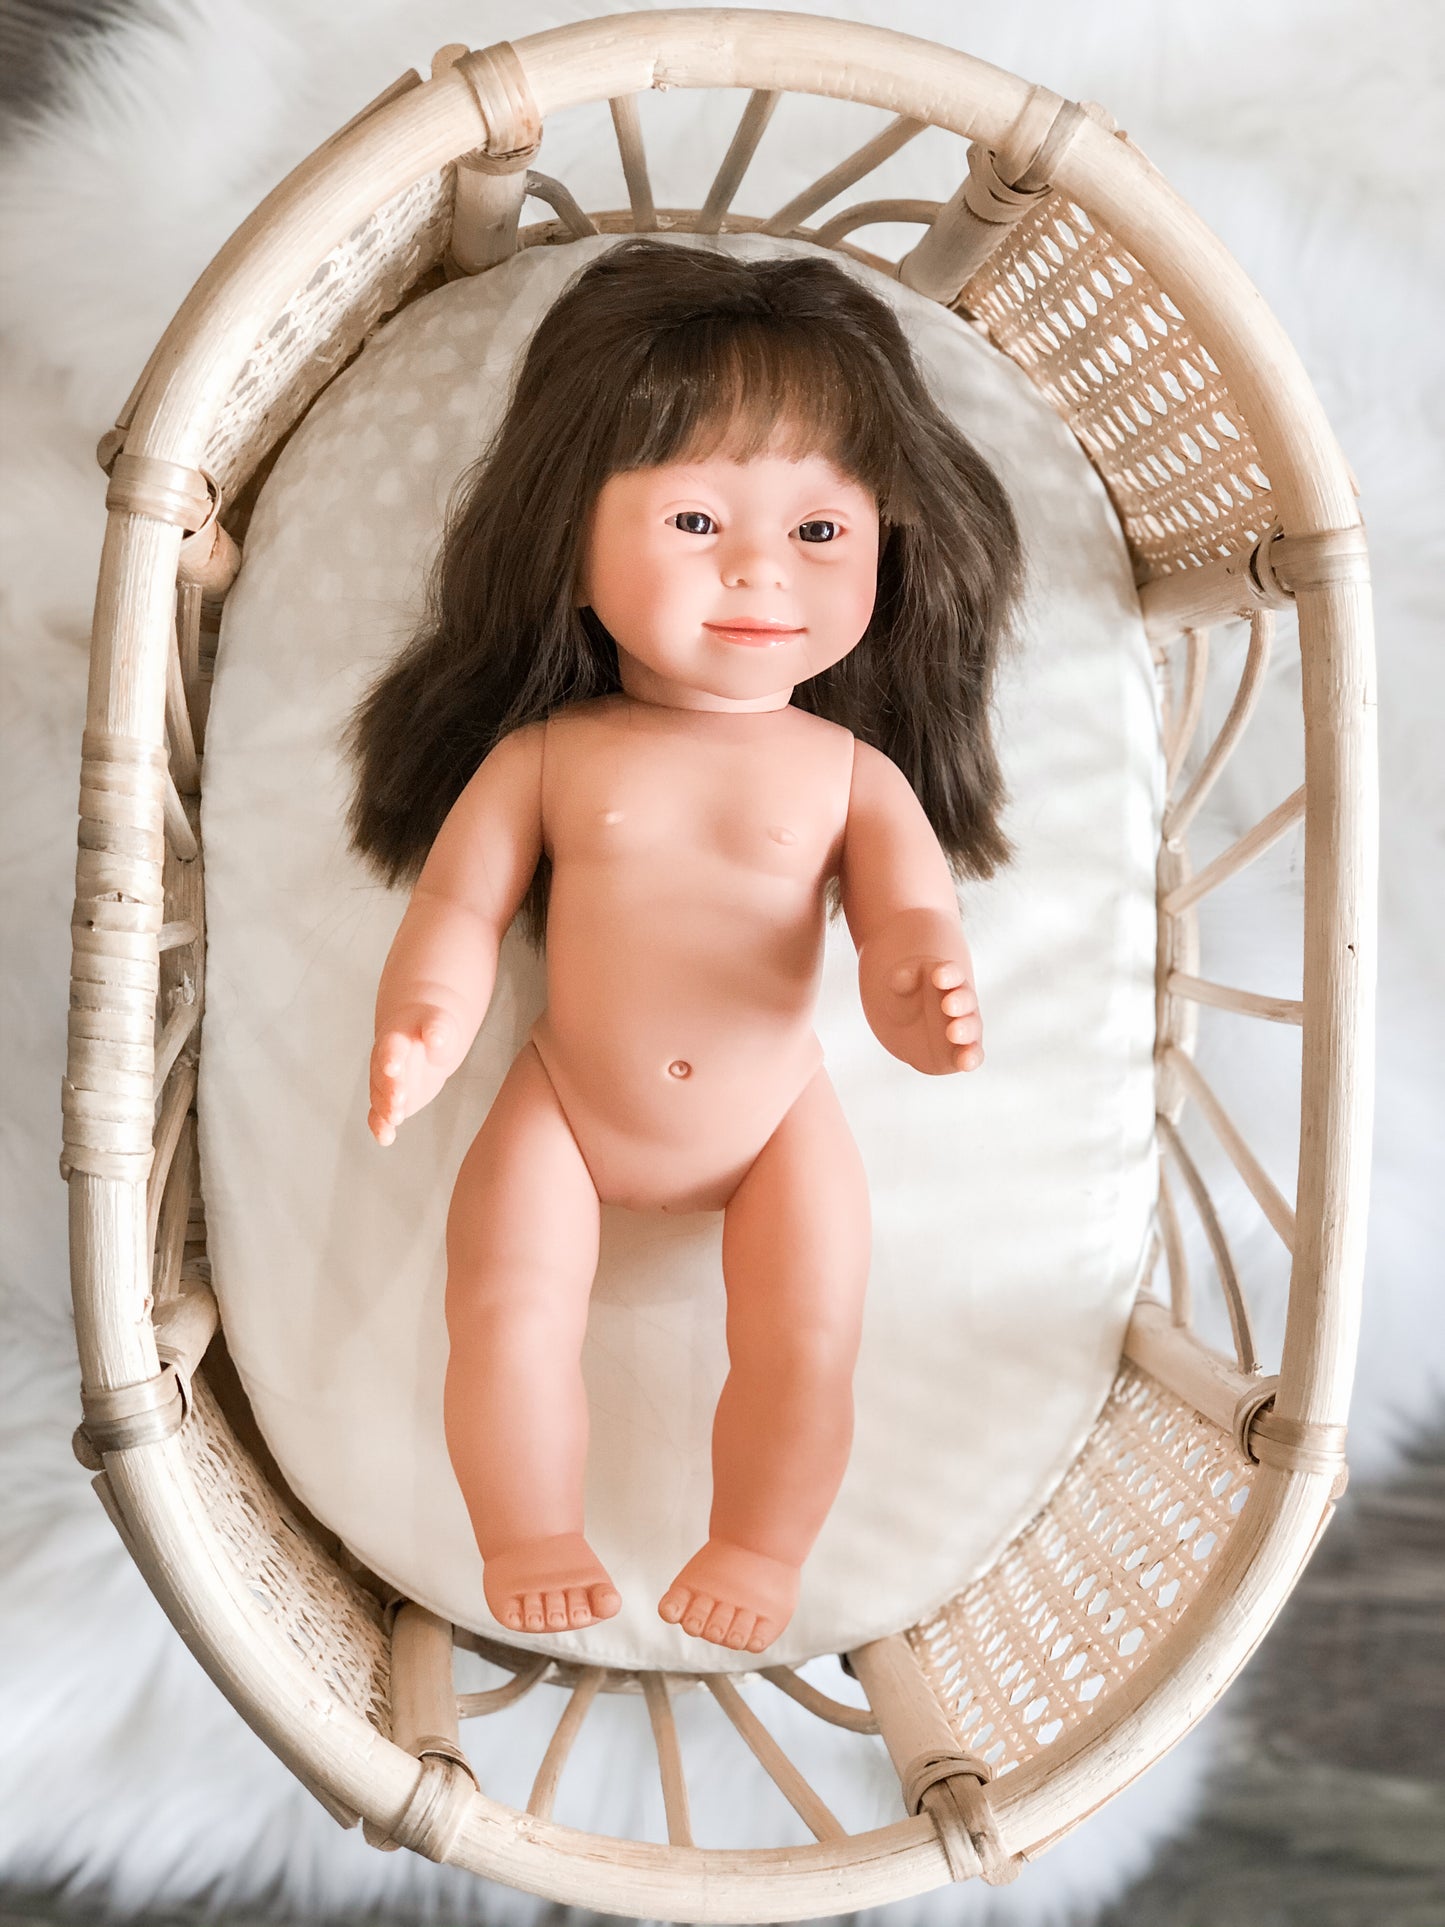 Kira -  Girl Doll with Down Syndrome